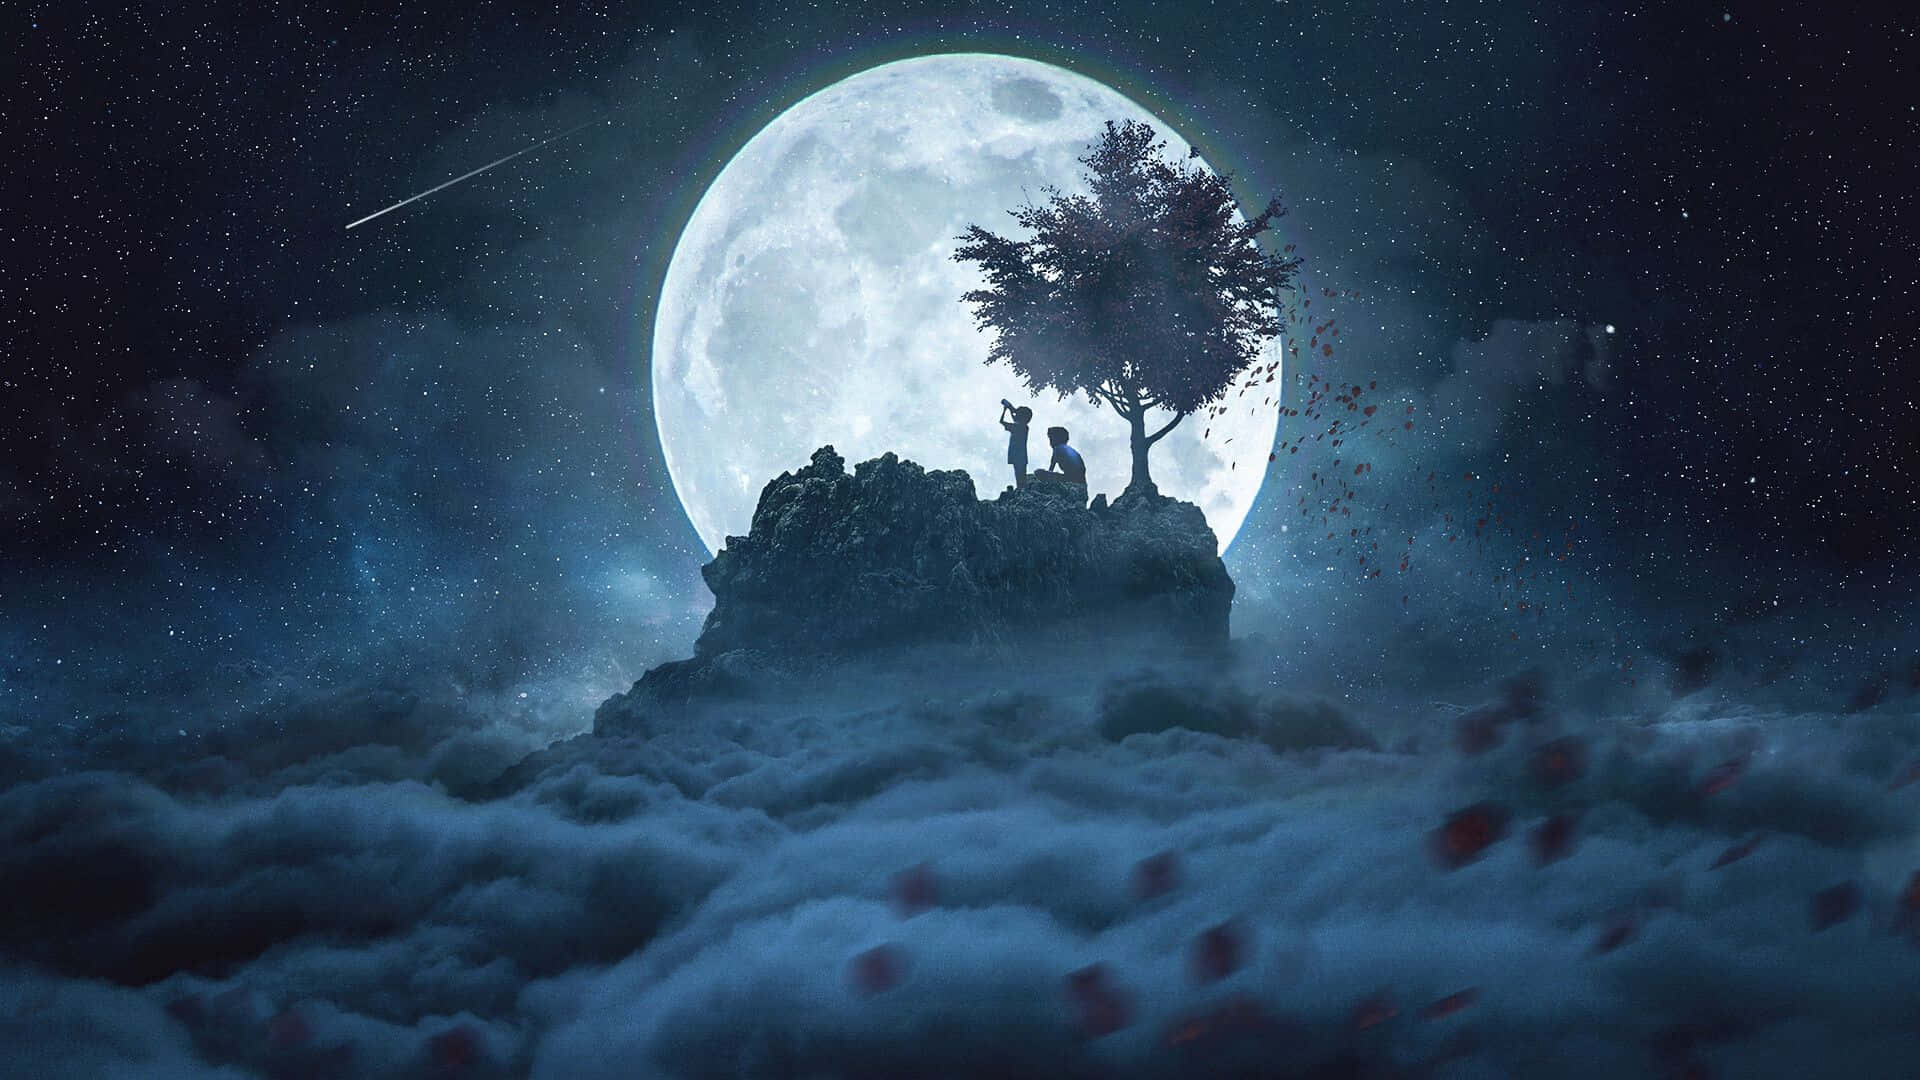 A magical night with a beautiful moon Wallpaper